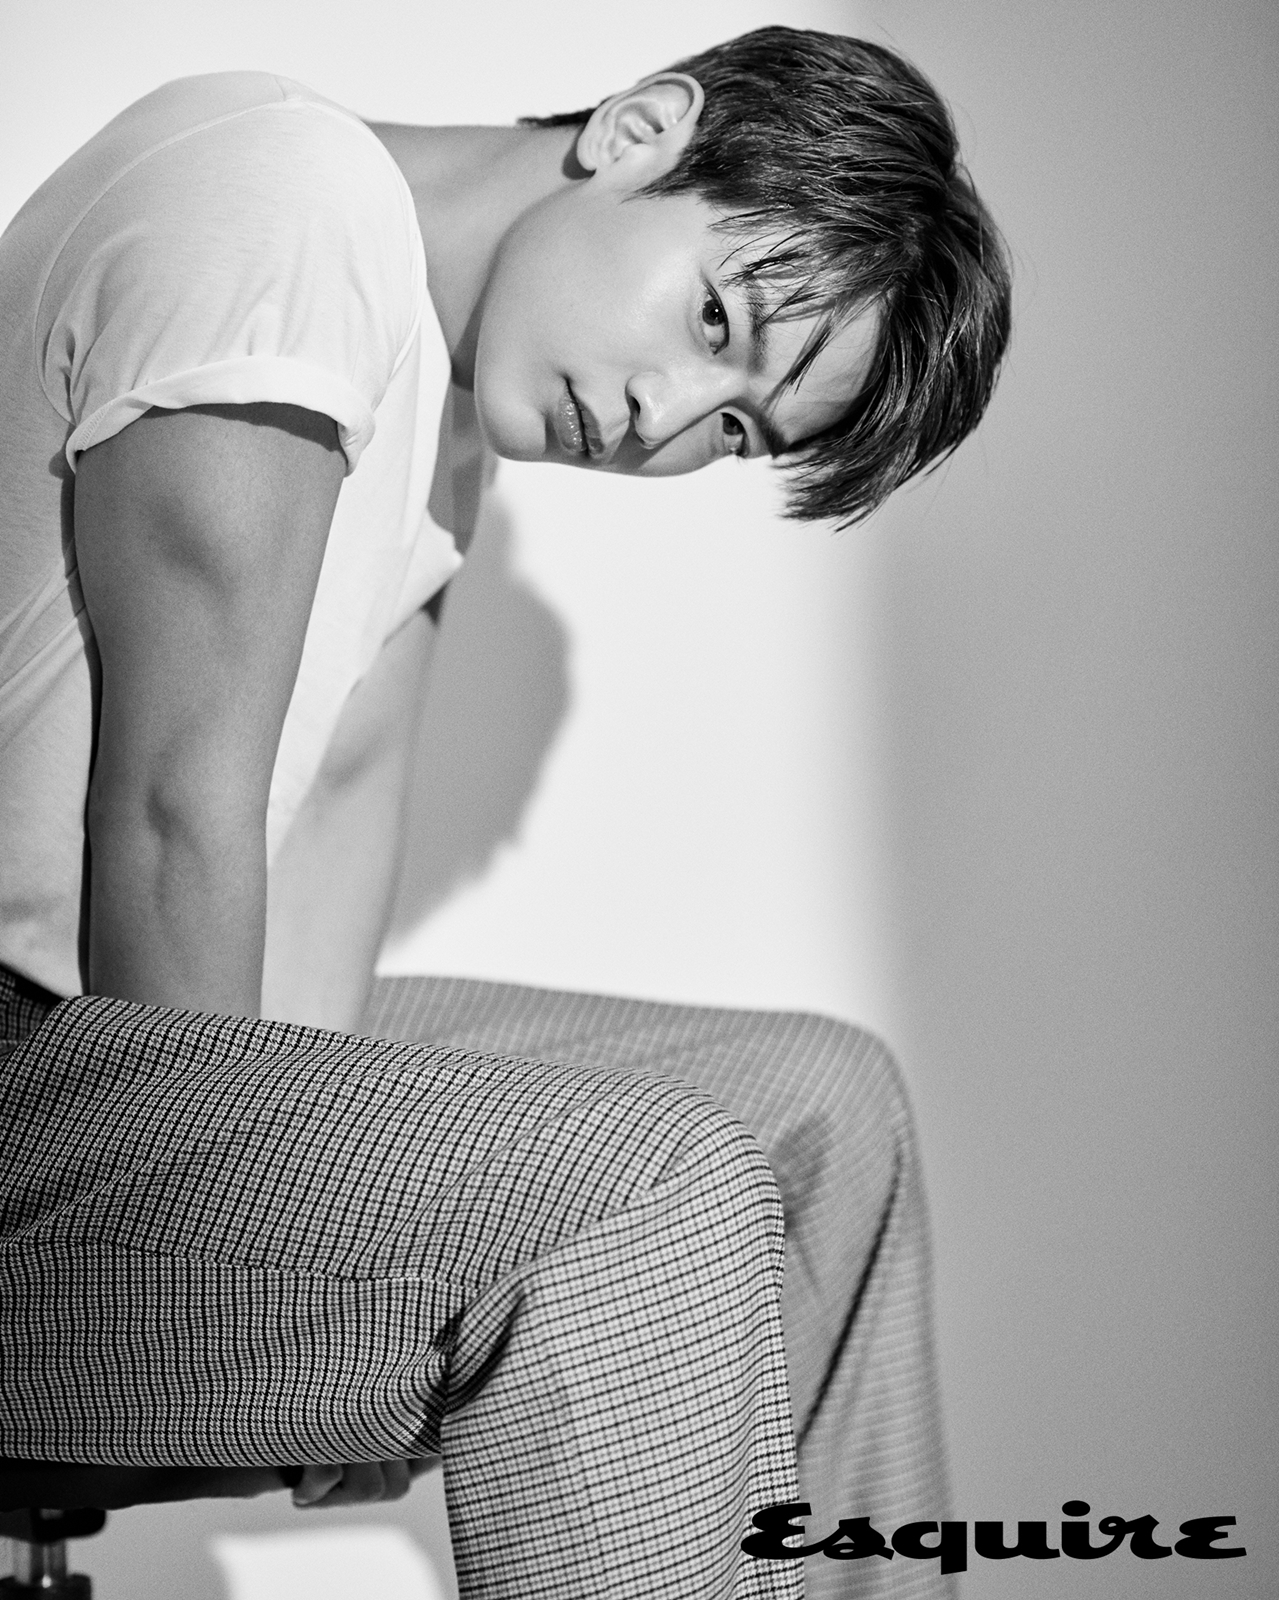 <p>With this sensational picture of the black and white tone, Choi Min-ho shows intense charm with only deeply eyes without big movements and no change in pose, diverging a selfish atmosphere I caught my eyes.</p><p>Especially Choi Min-ho will show incredible concentration ability when shooting starts even though it intends to be relaxed at the shooting site, show off a nice visual for each cut and draw out the elasticity of the staff I also did.</p><p>In an interview performed together with the shooting of images, Choi Min-ho said, It was really lucky to be able to shoot with Kim Jee-woon director, said Jin-Roh : The Wolf Brigade and the impression of the appearance and the work-behind talked about a variety of frank story, such as impression which came to the 10th anniversary of SHINee as well as Balhototum.</p><p>Choi Min-ho plays the role of Tsukgeides core crew member Kim Choljin at the coming movie Jin-Roh: The Wolf Brigade (director Kim Jee-woon) and presents a new appearance with a new appearance, I am planning to meet the audiences, expressing expectations.</p>